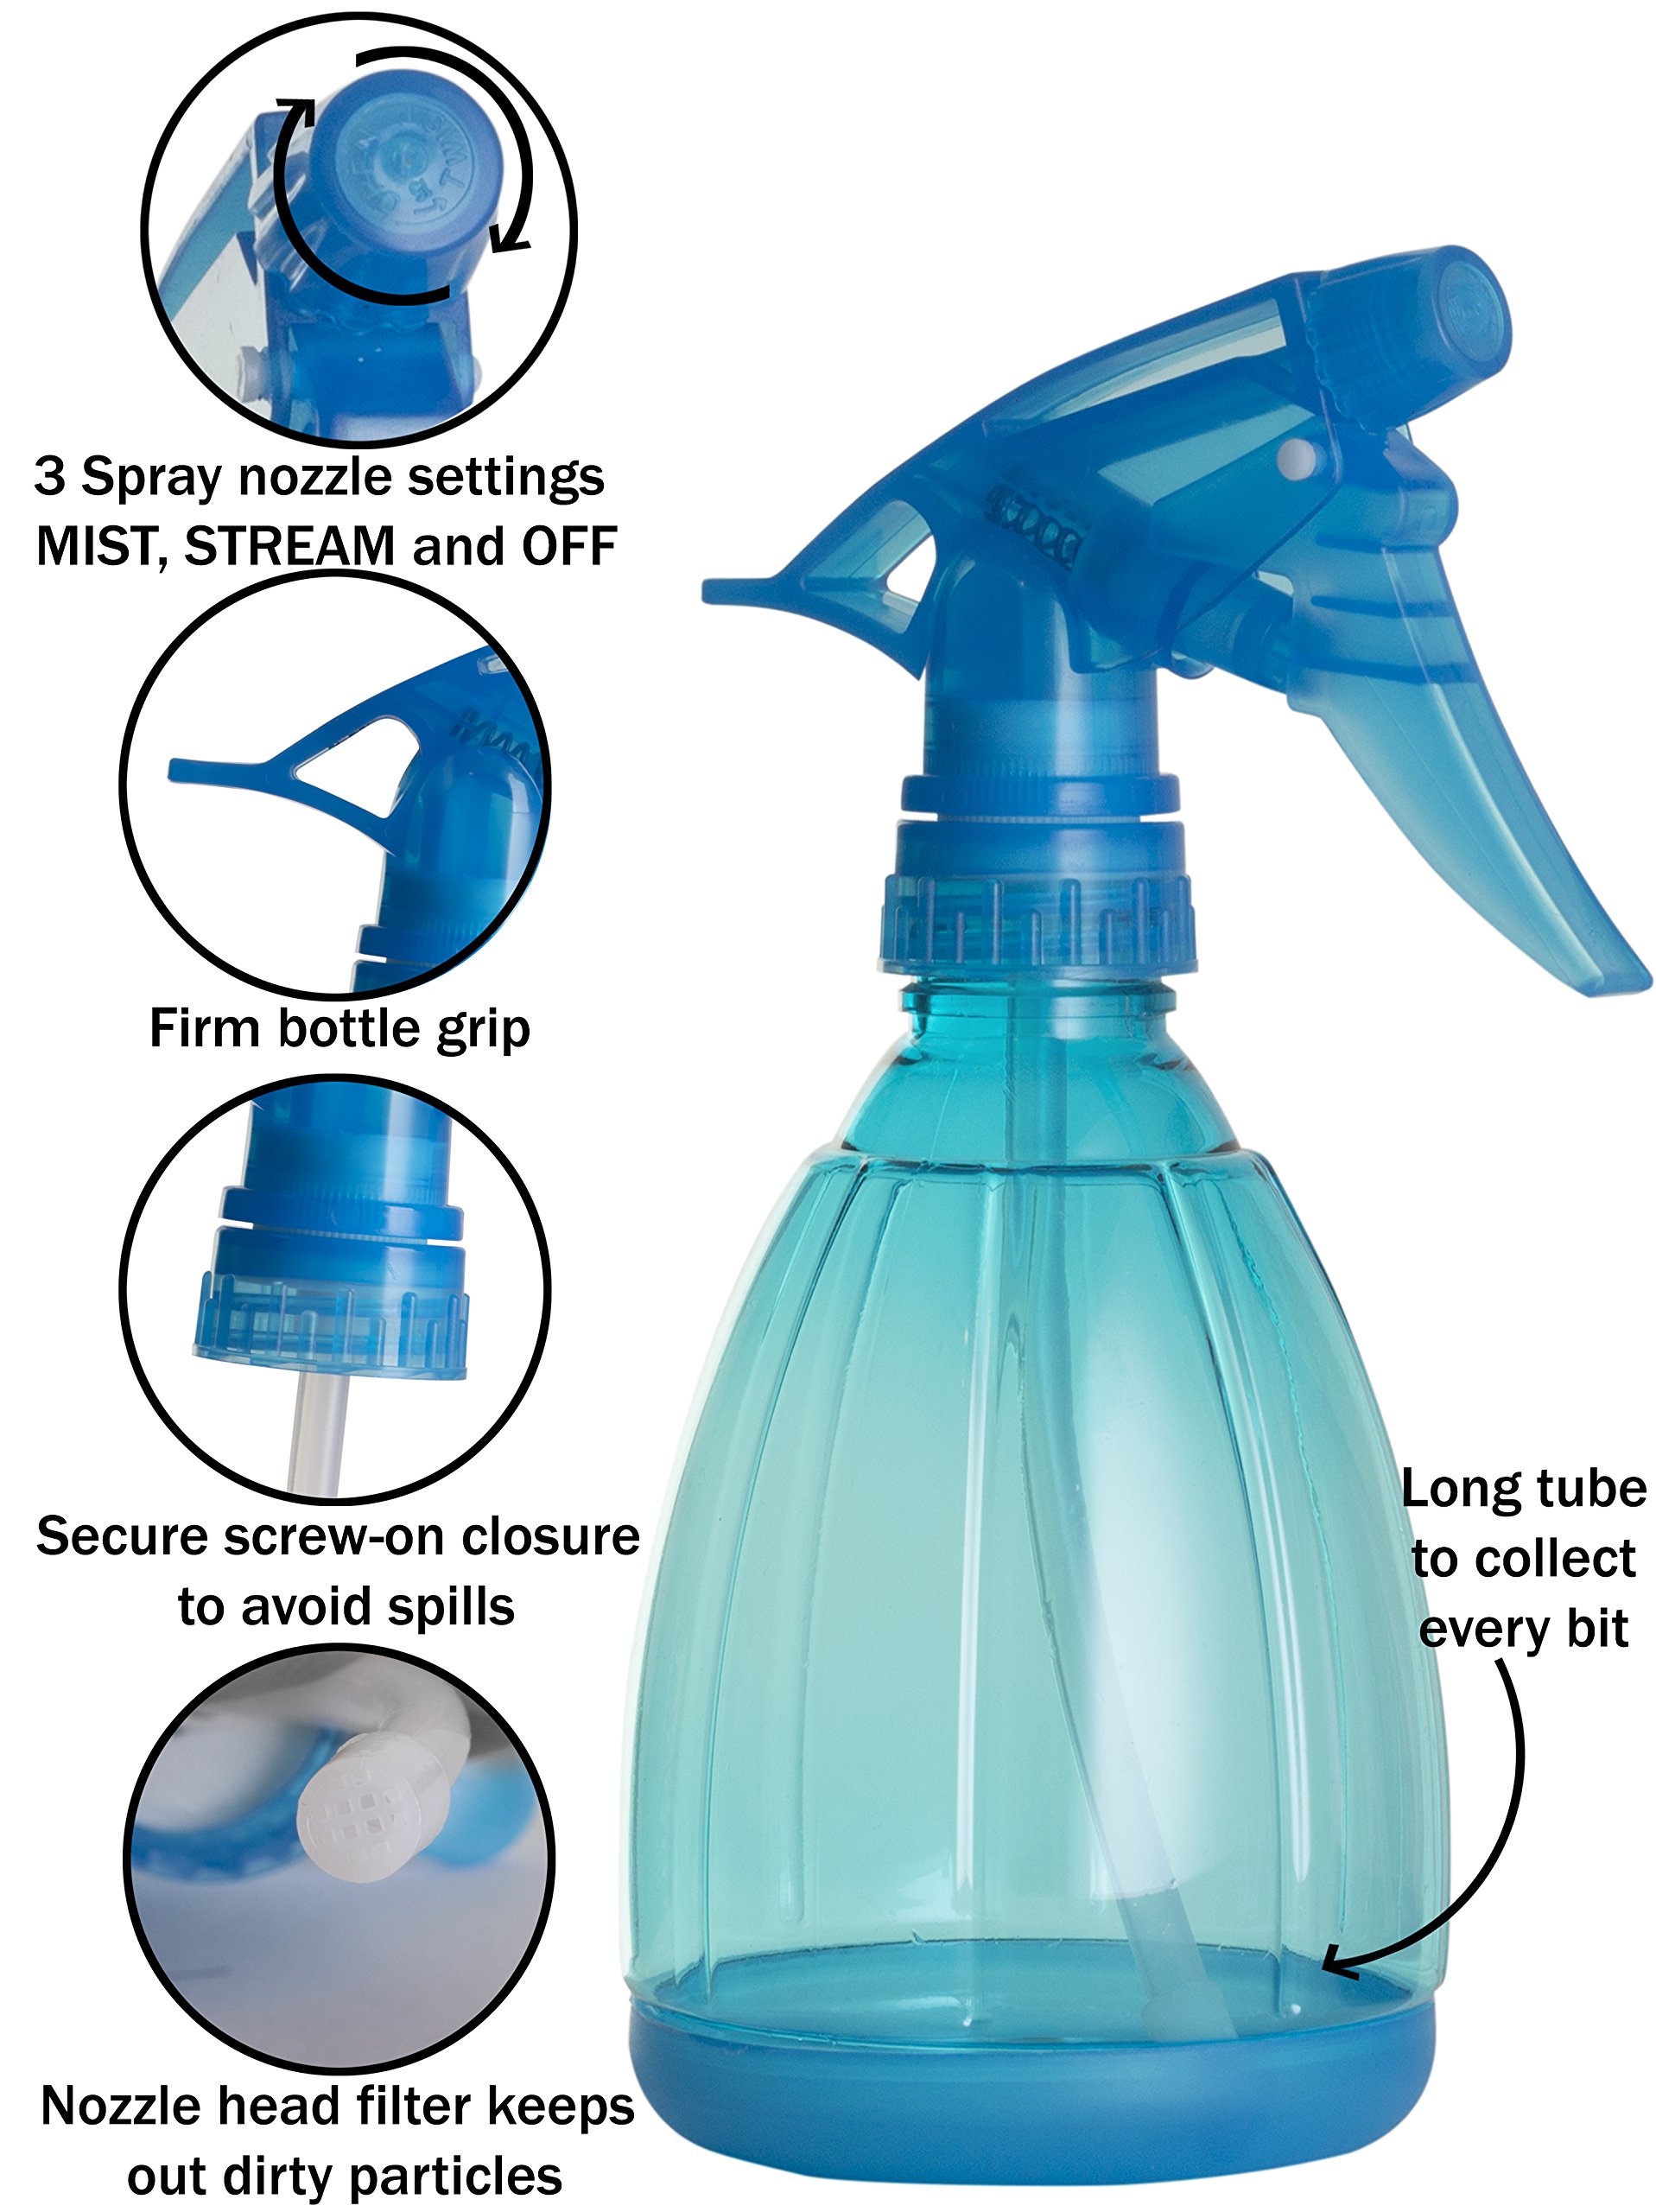 Empty Spray Bottles - 12 Oz Refillable Sprayer - pack of 3 - for Essential Oil, Water, Kitchen, Bath, Beauty, Hair, and Cleaning - Durable Trigger Sprayer with Mist & Stream Modes